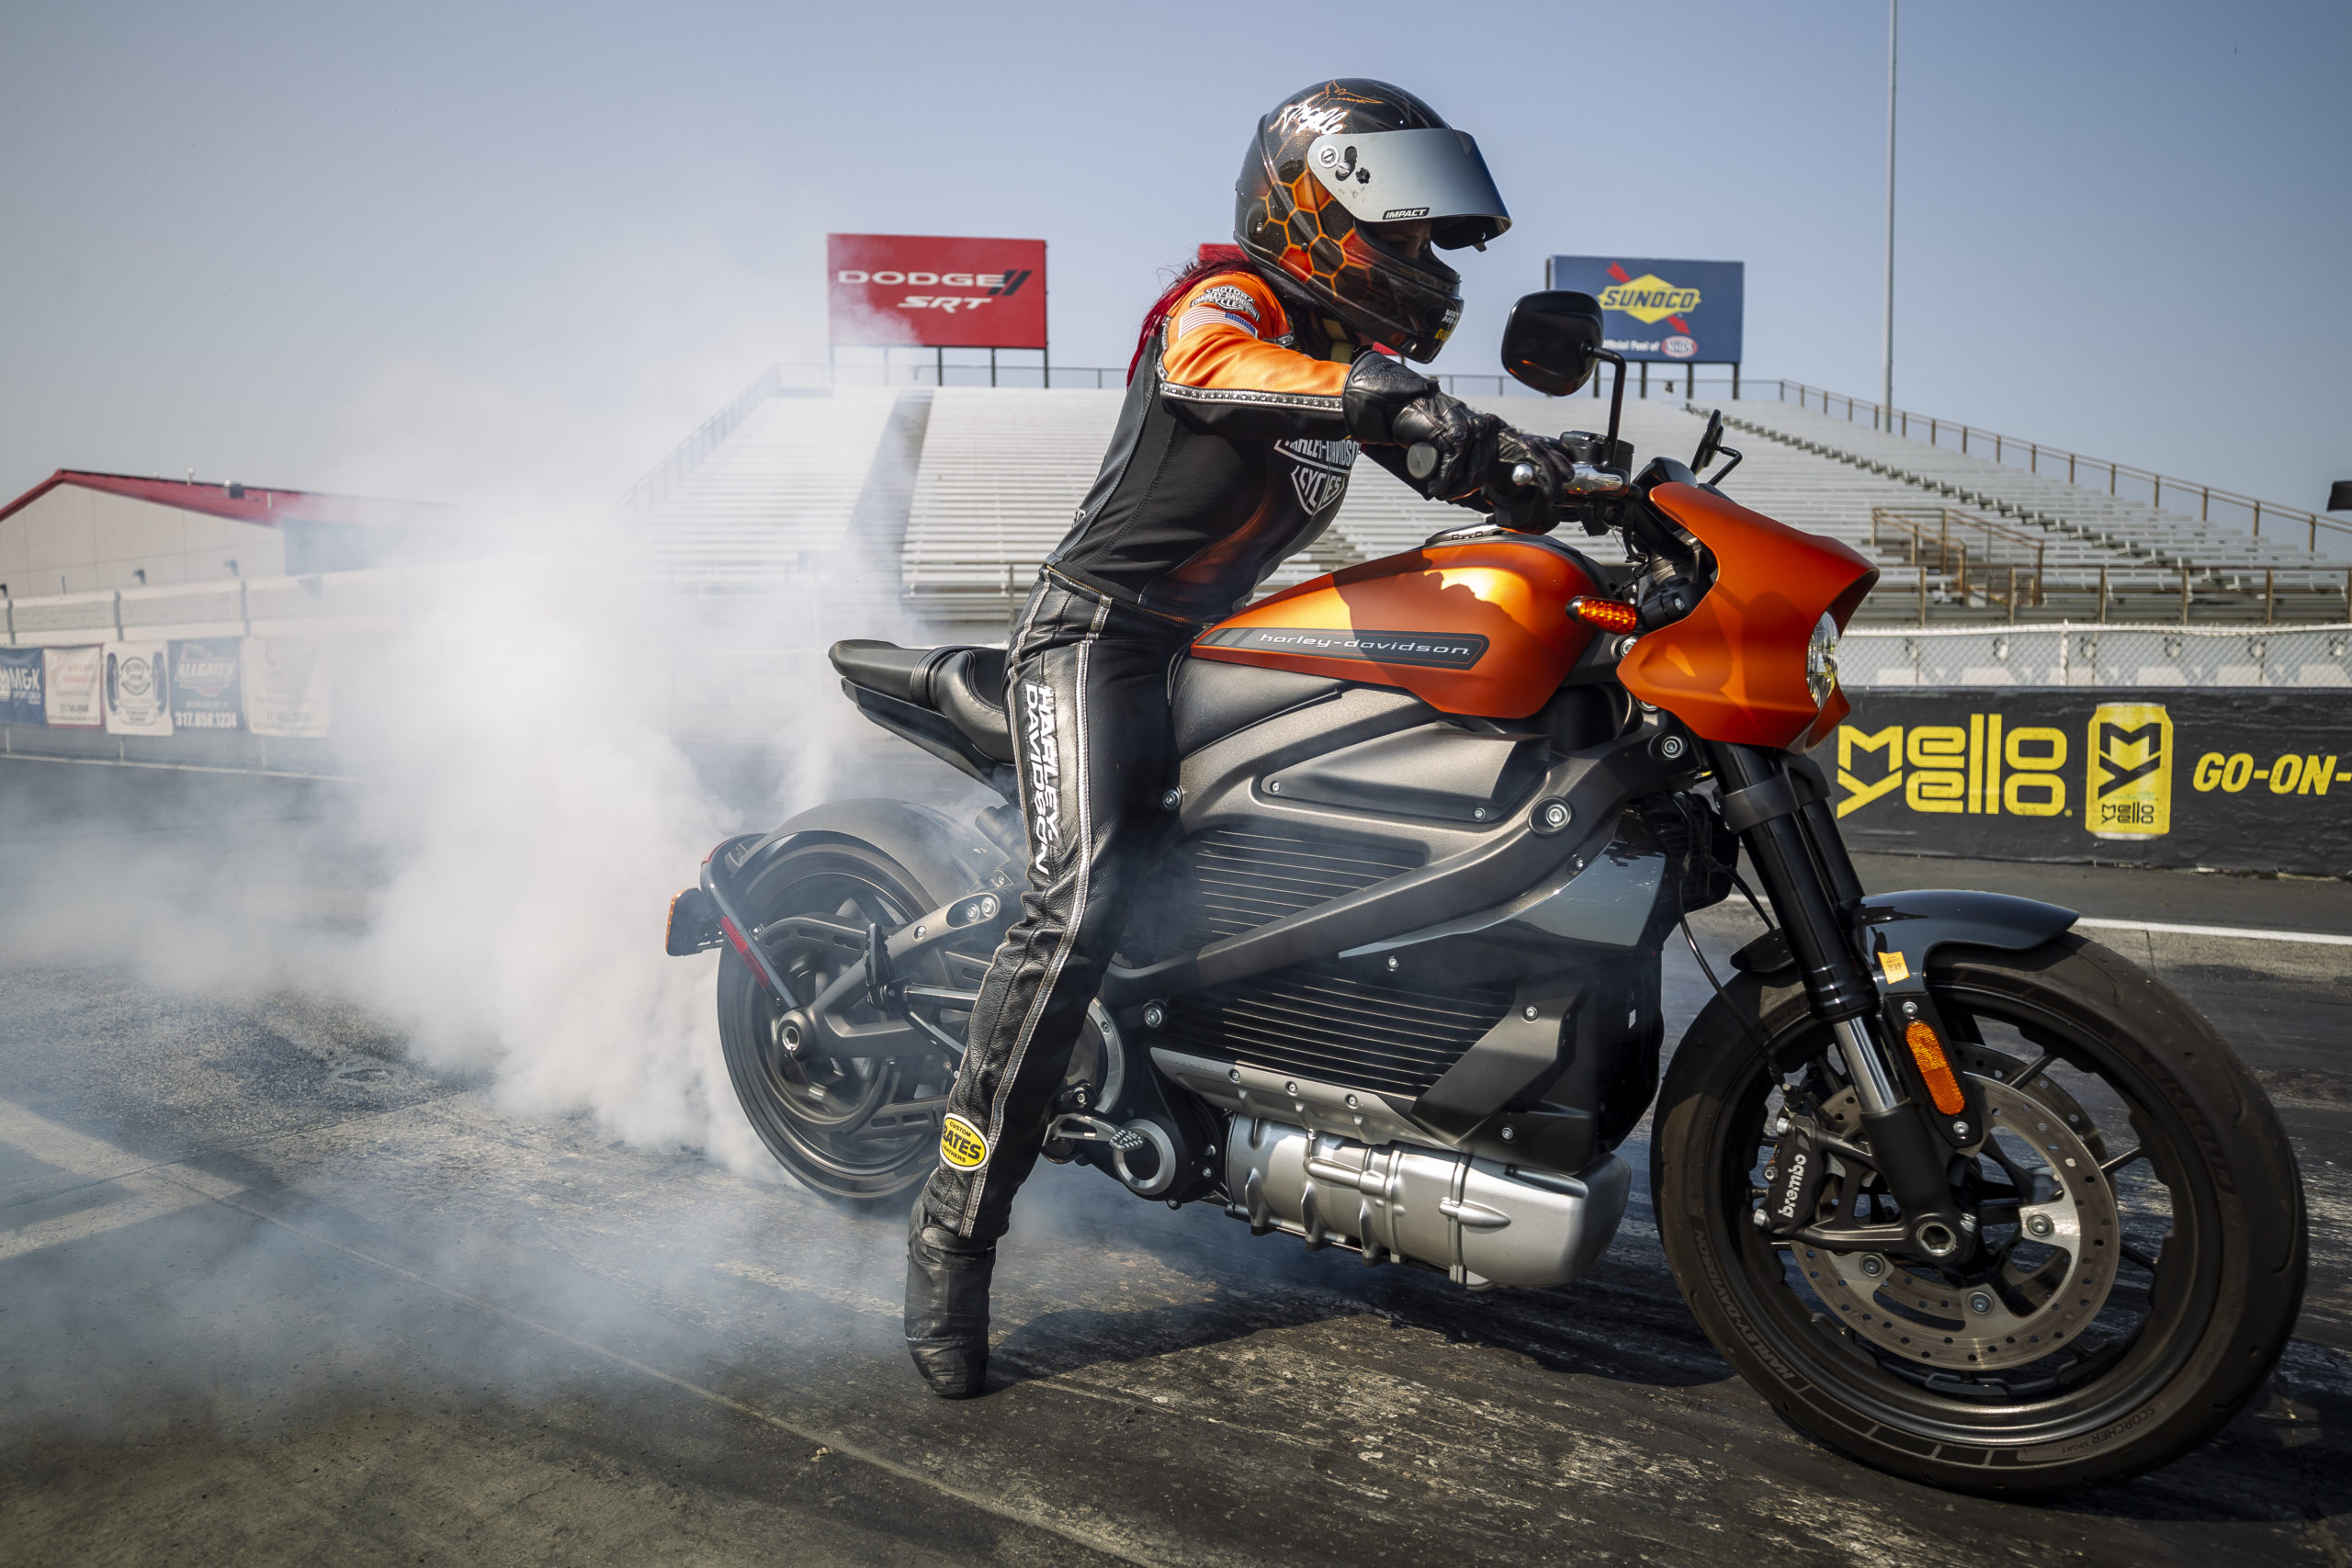 Angelle Sampey sets the record aboard the Harley-Davidson LiveWire